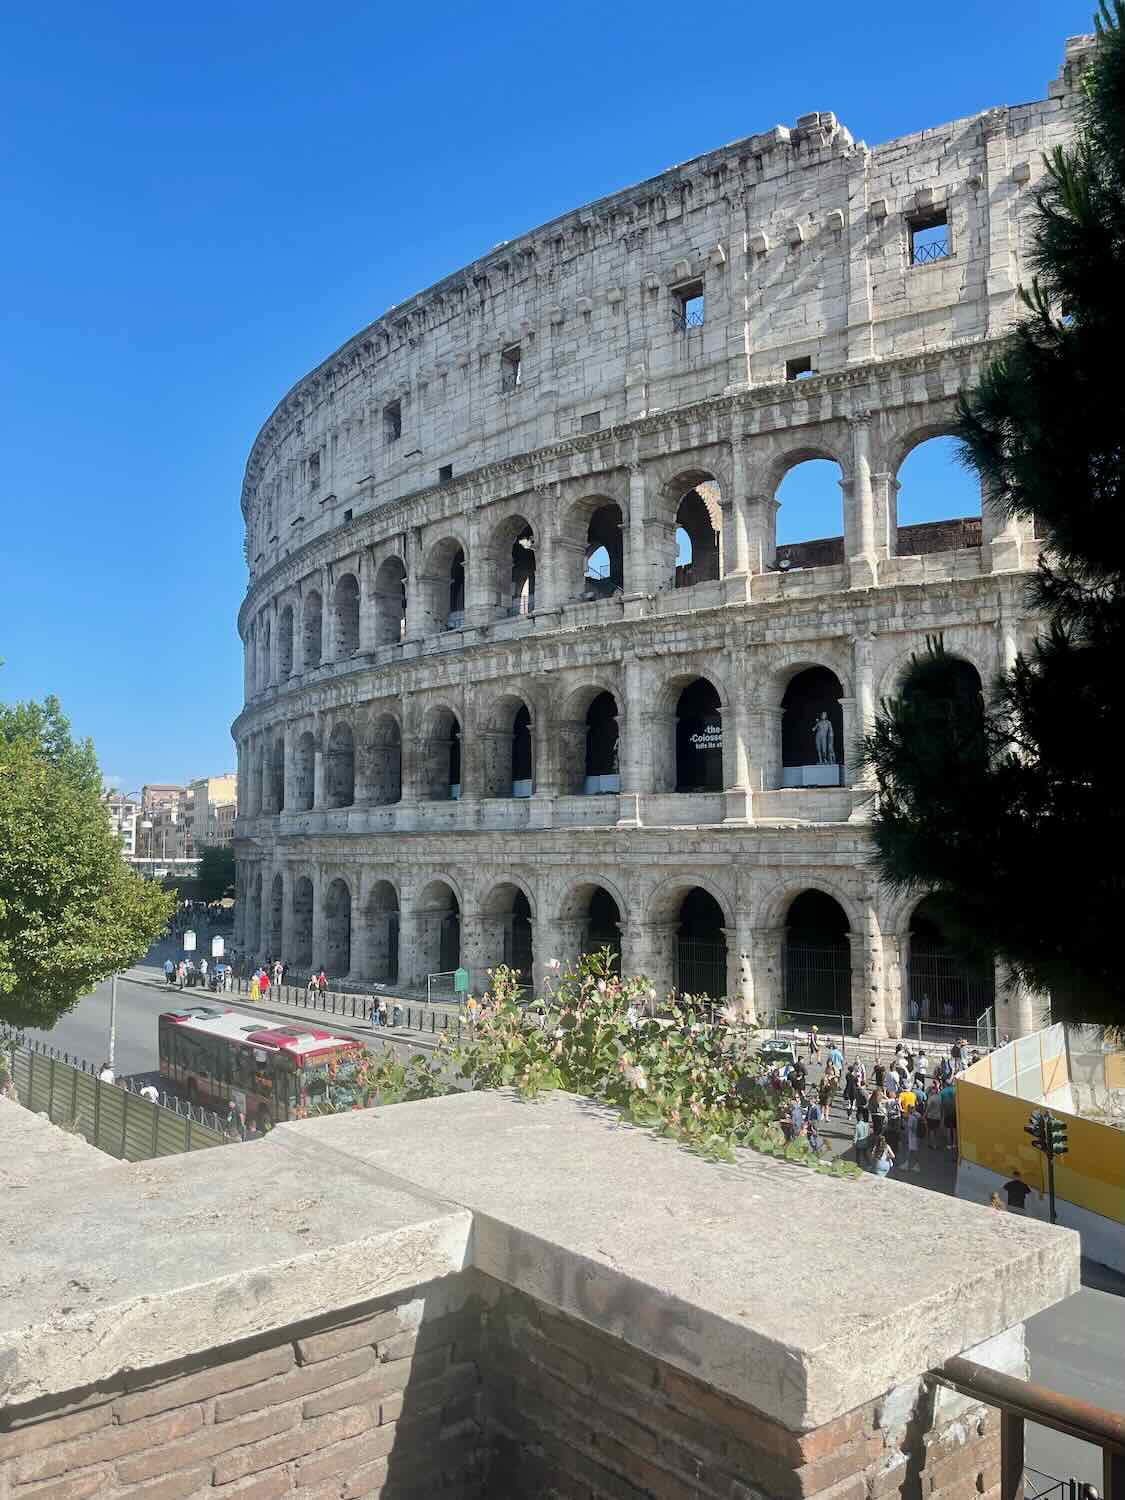 A photo of the Colosseum in Rome on a sunny day, showcasing its ancient, arched structure. The foreground includes some trees and a bus, with tourists visible around the iconic landmark.